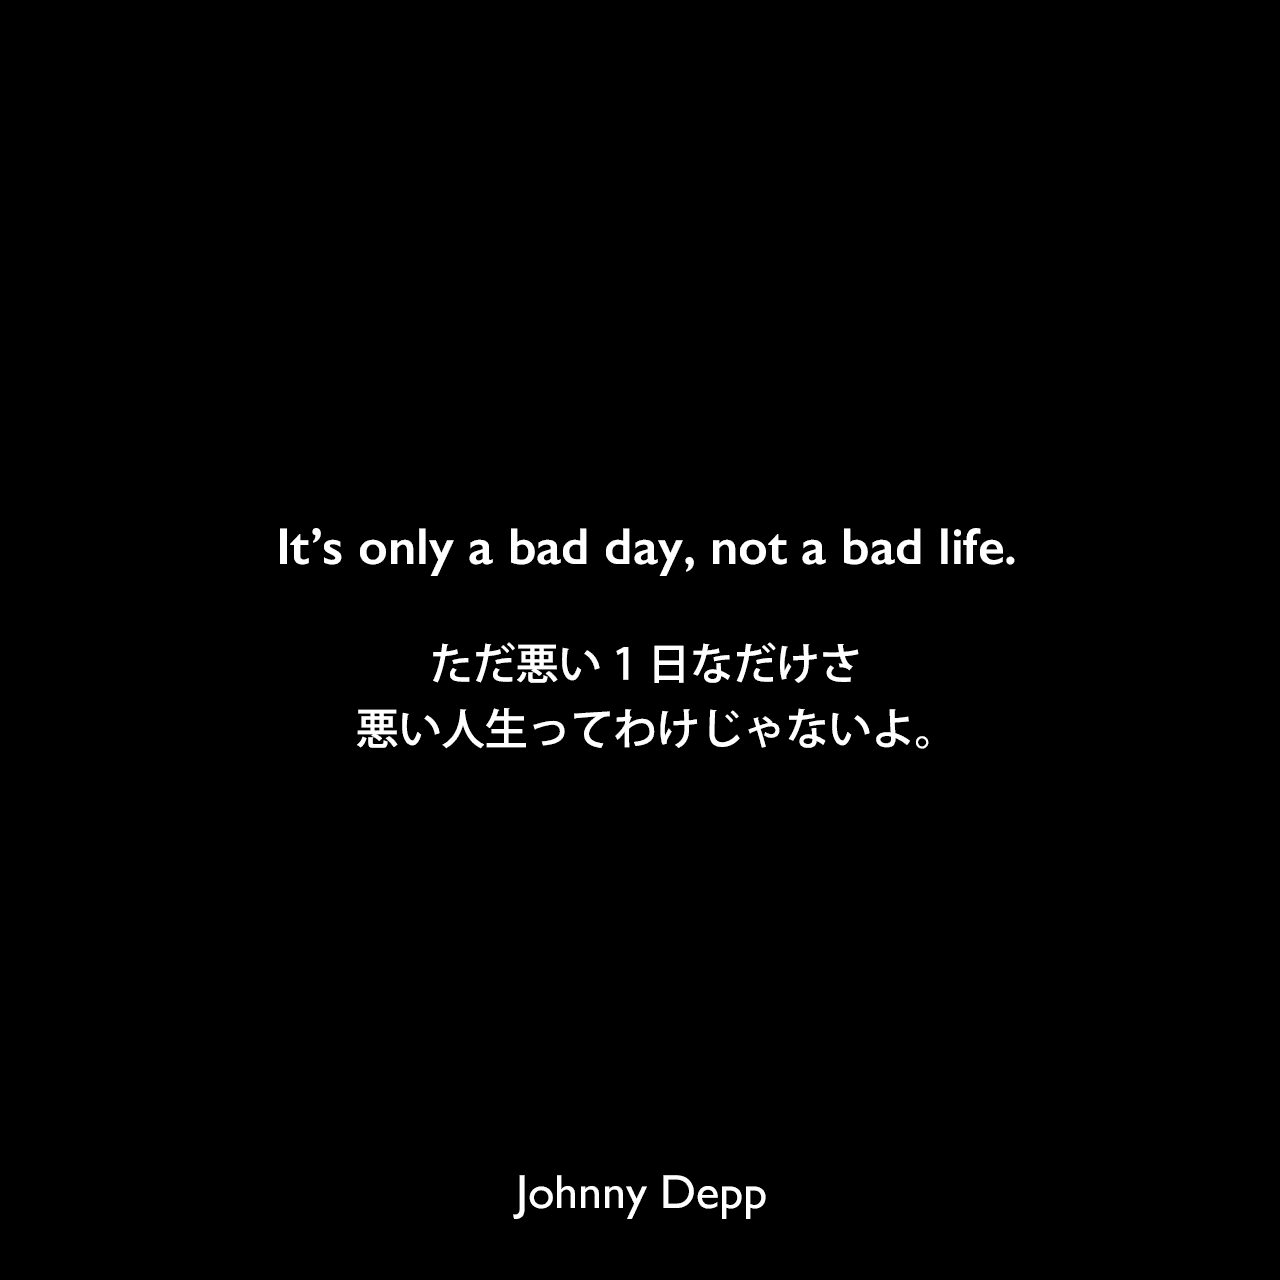 It’s only a bad day, not a bad life.ただ悪い1日なだけさ、悪い人生ってわけじゃないよ。Johnny Depp